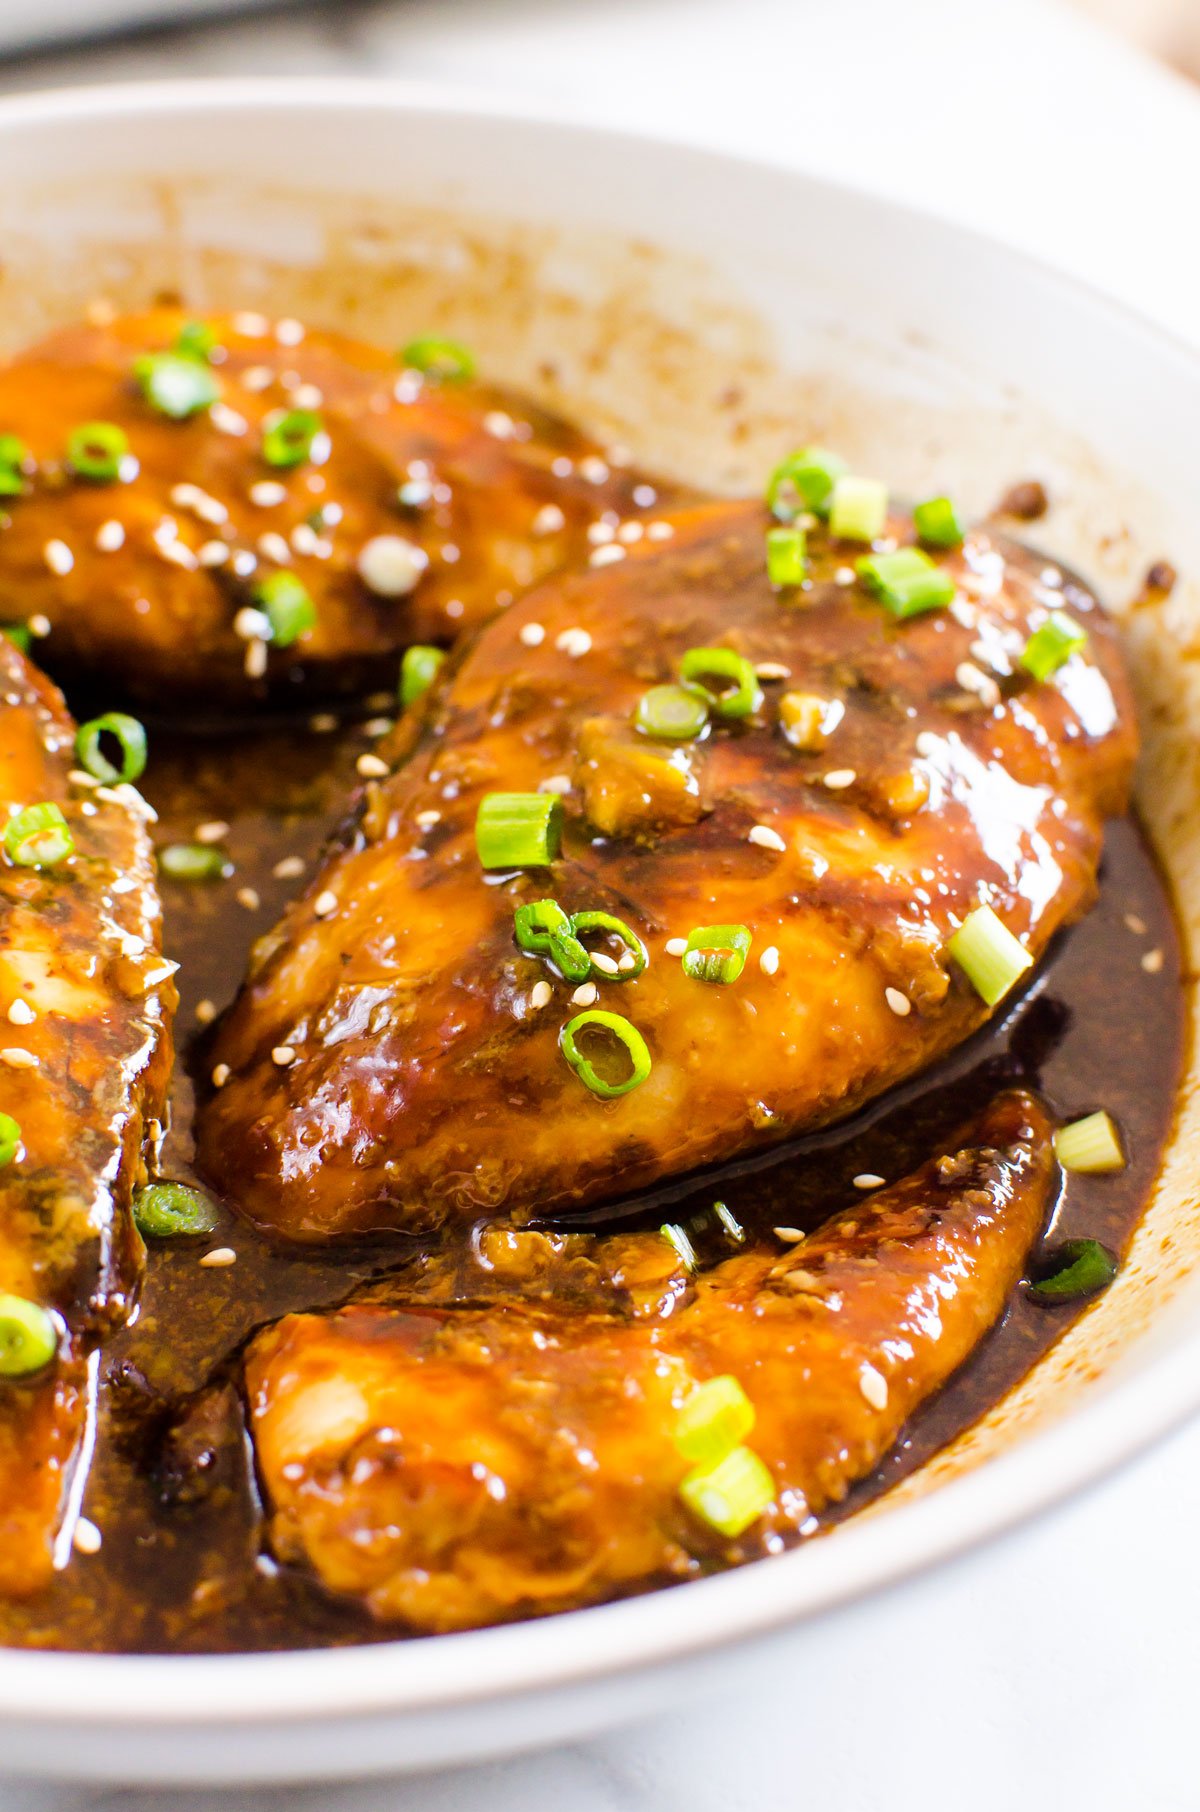 Honey chicken breast recipe with healthy soy garlic sauce in baking dish.